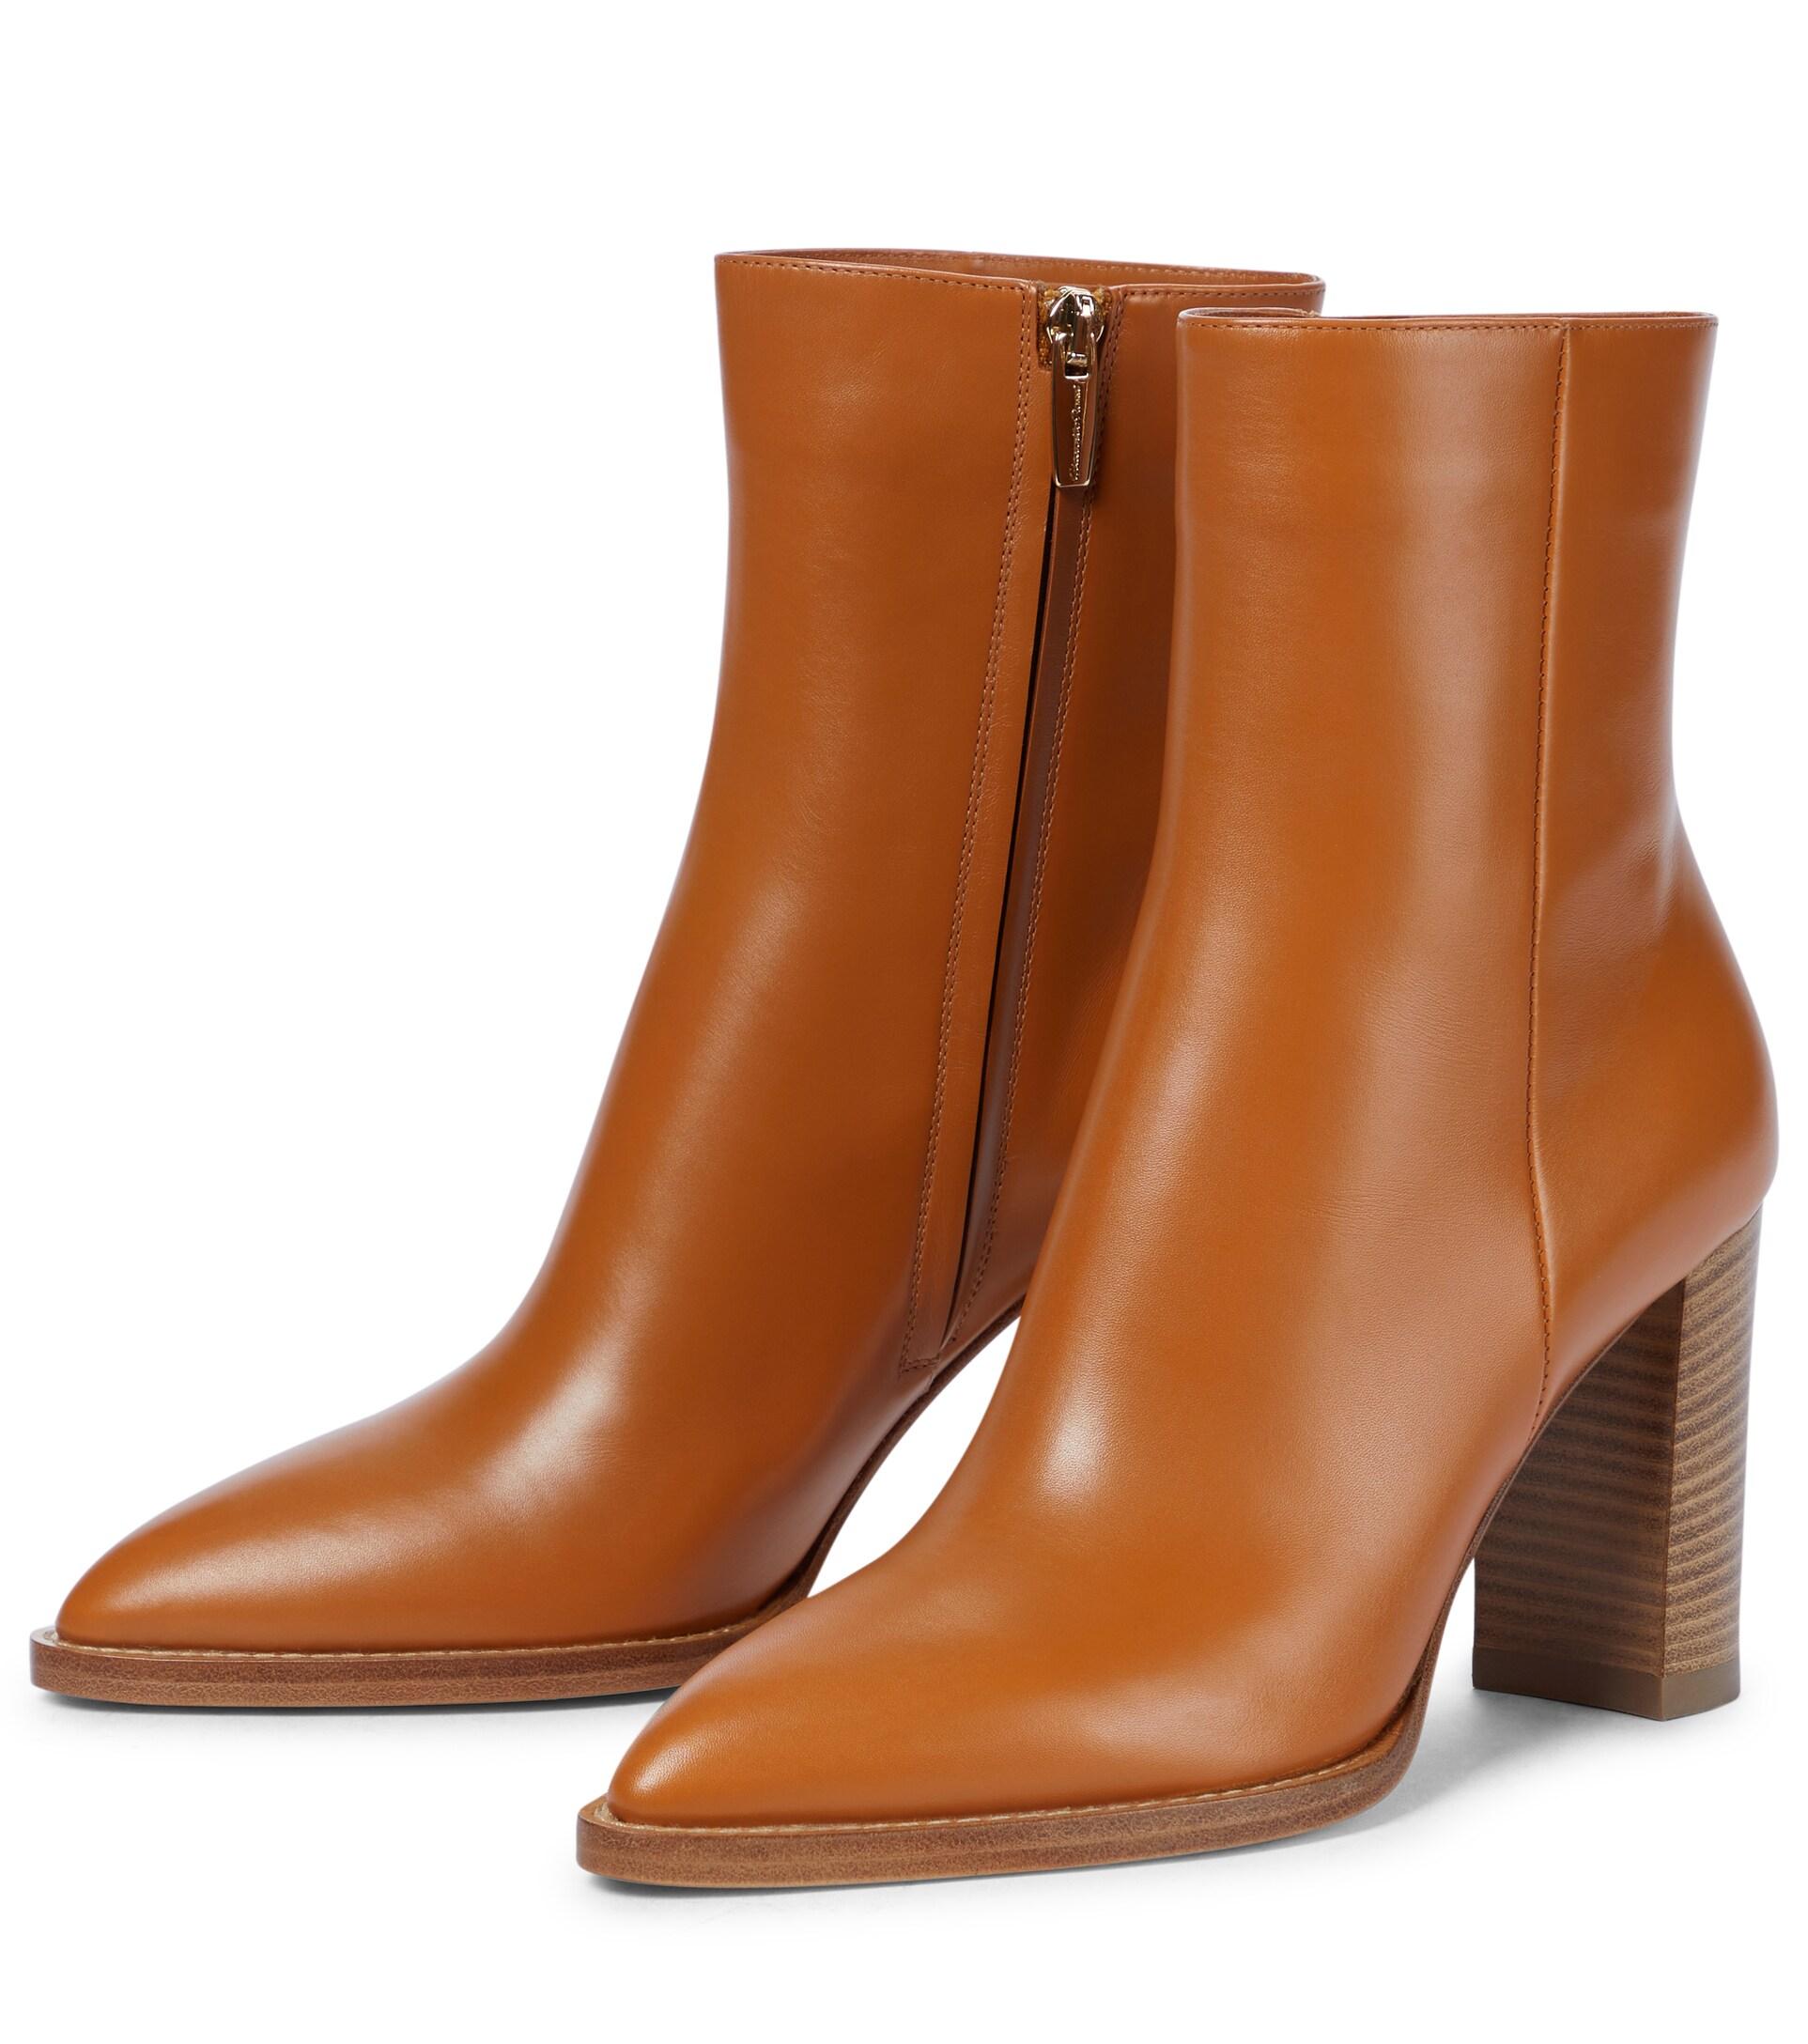 Gianvito Rossi River 85 Leather Ankle Boots in Brown | Lyst